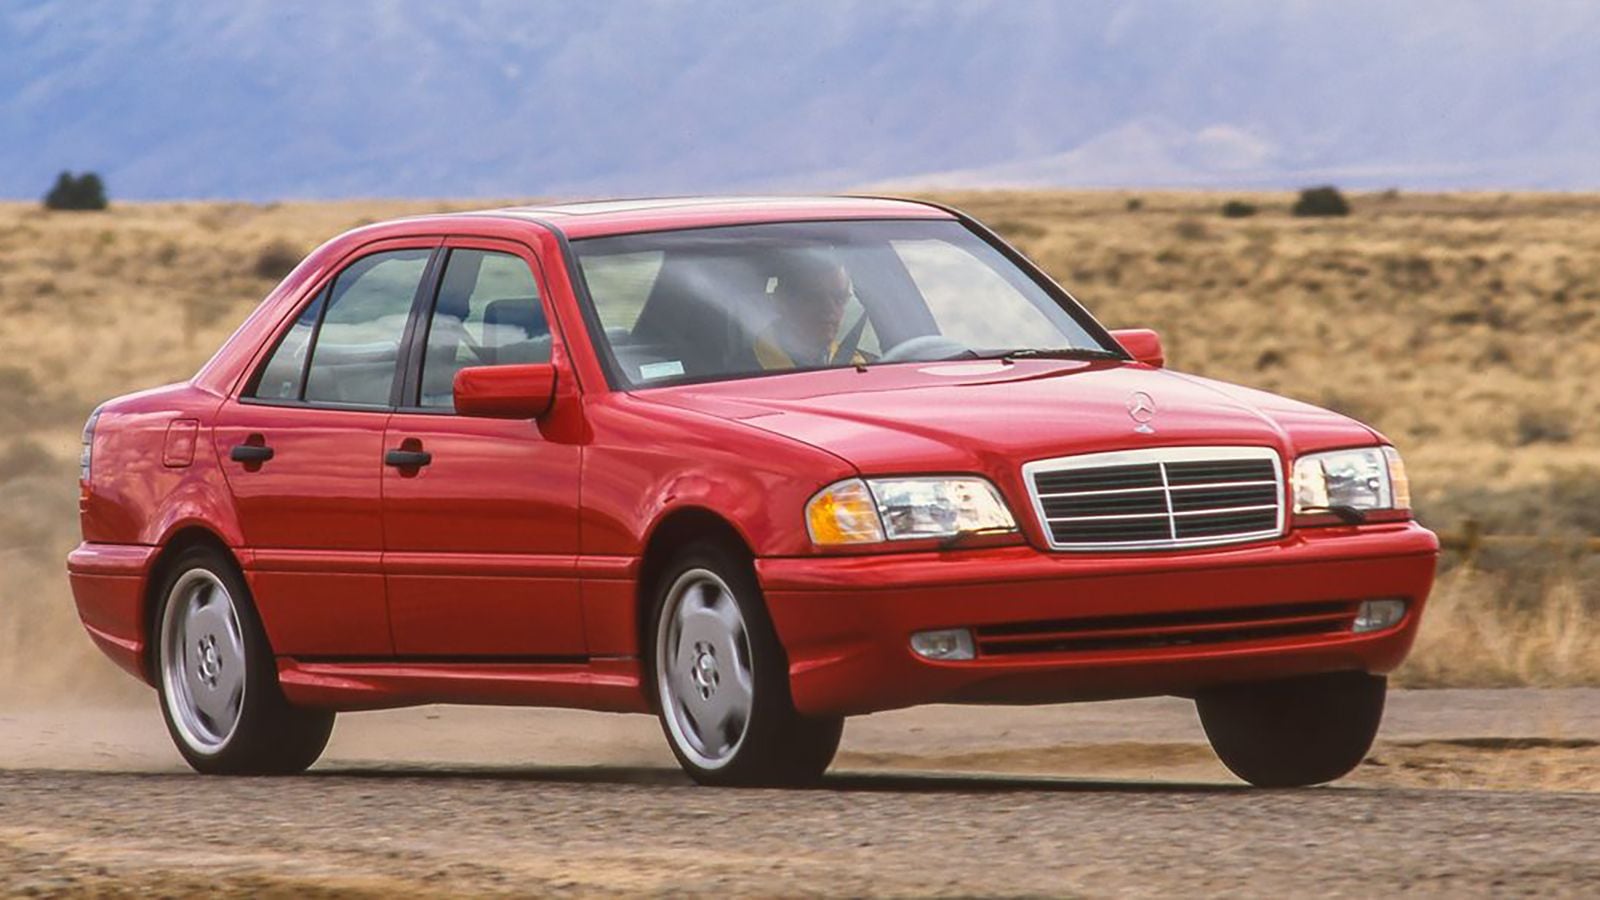 My favorite designs: Mercedes-Benz C-class W204, by Let's Talk About Cars